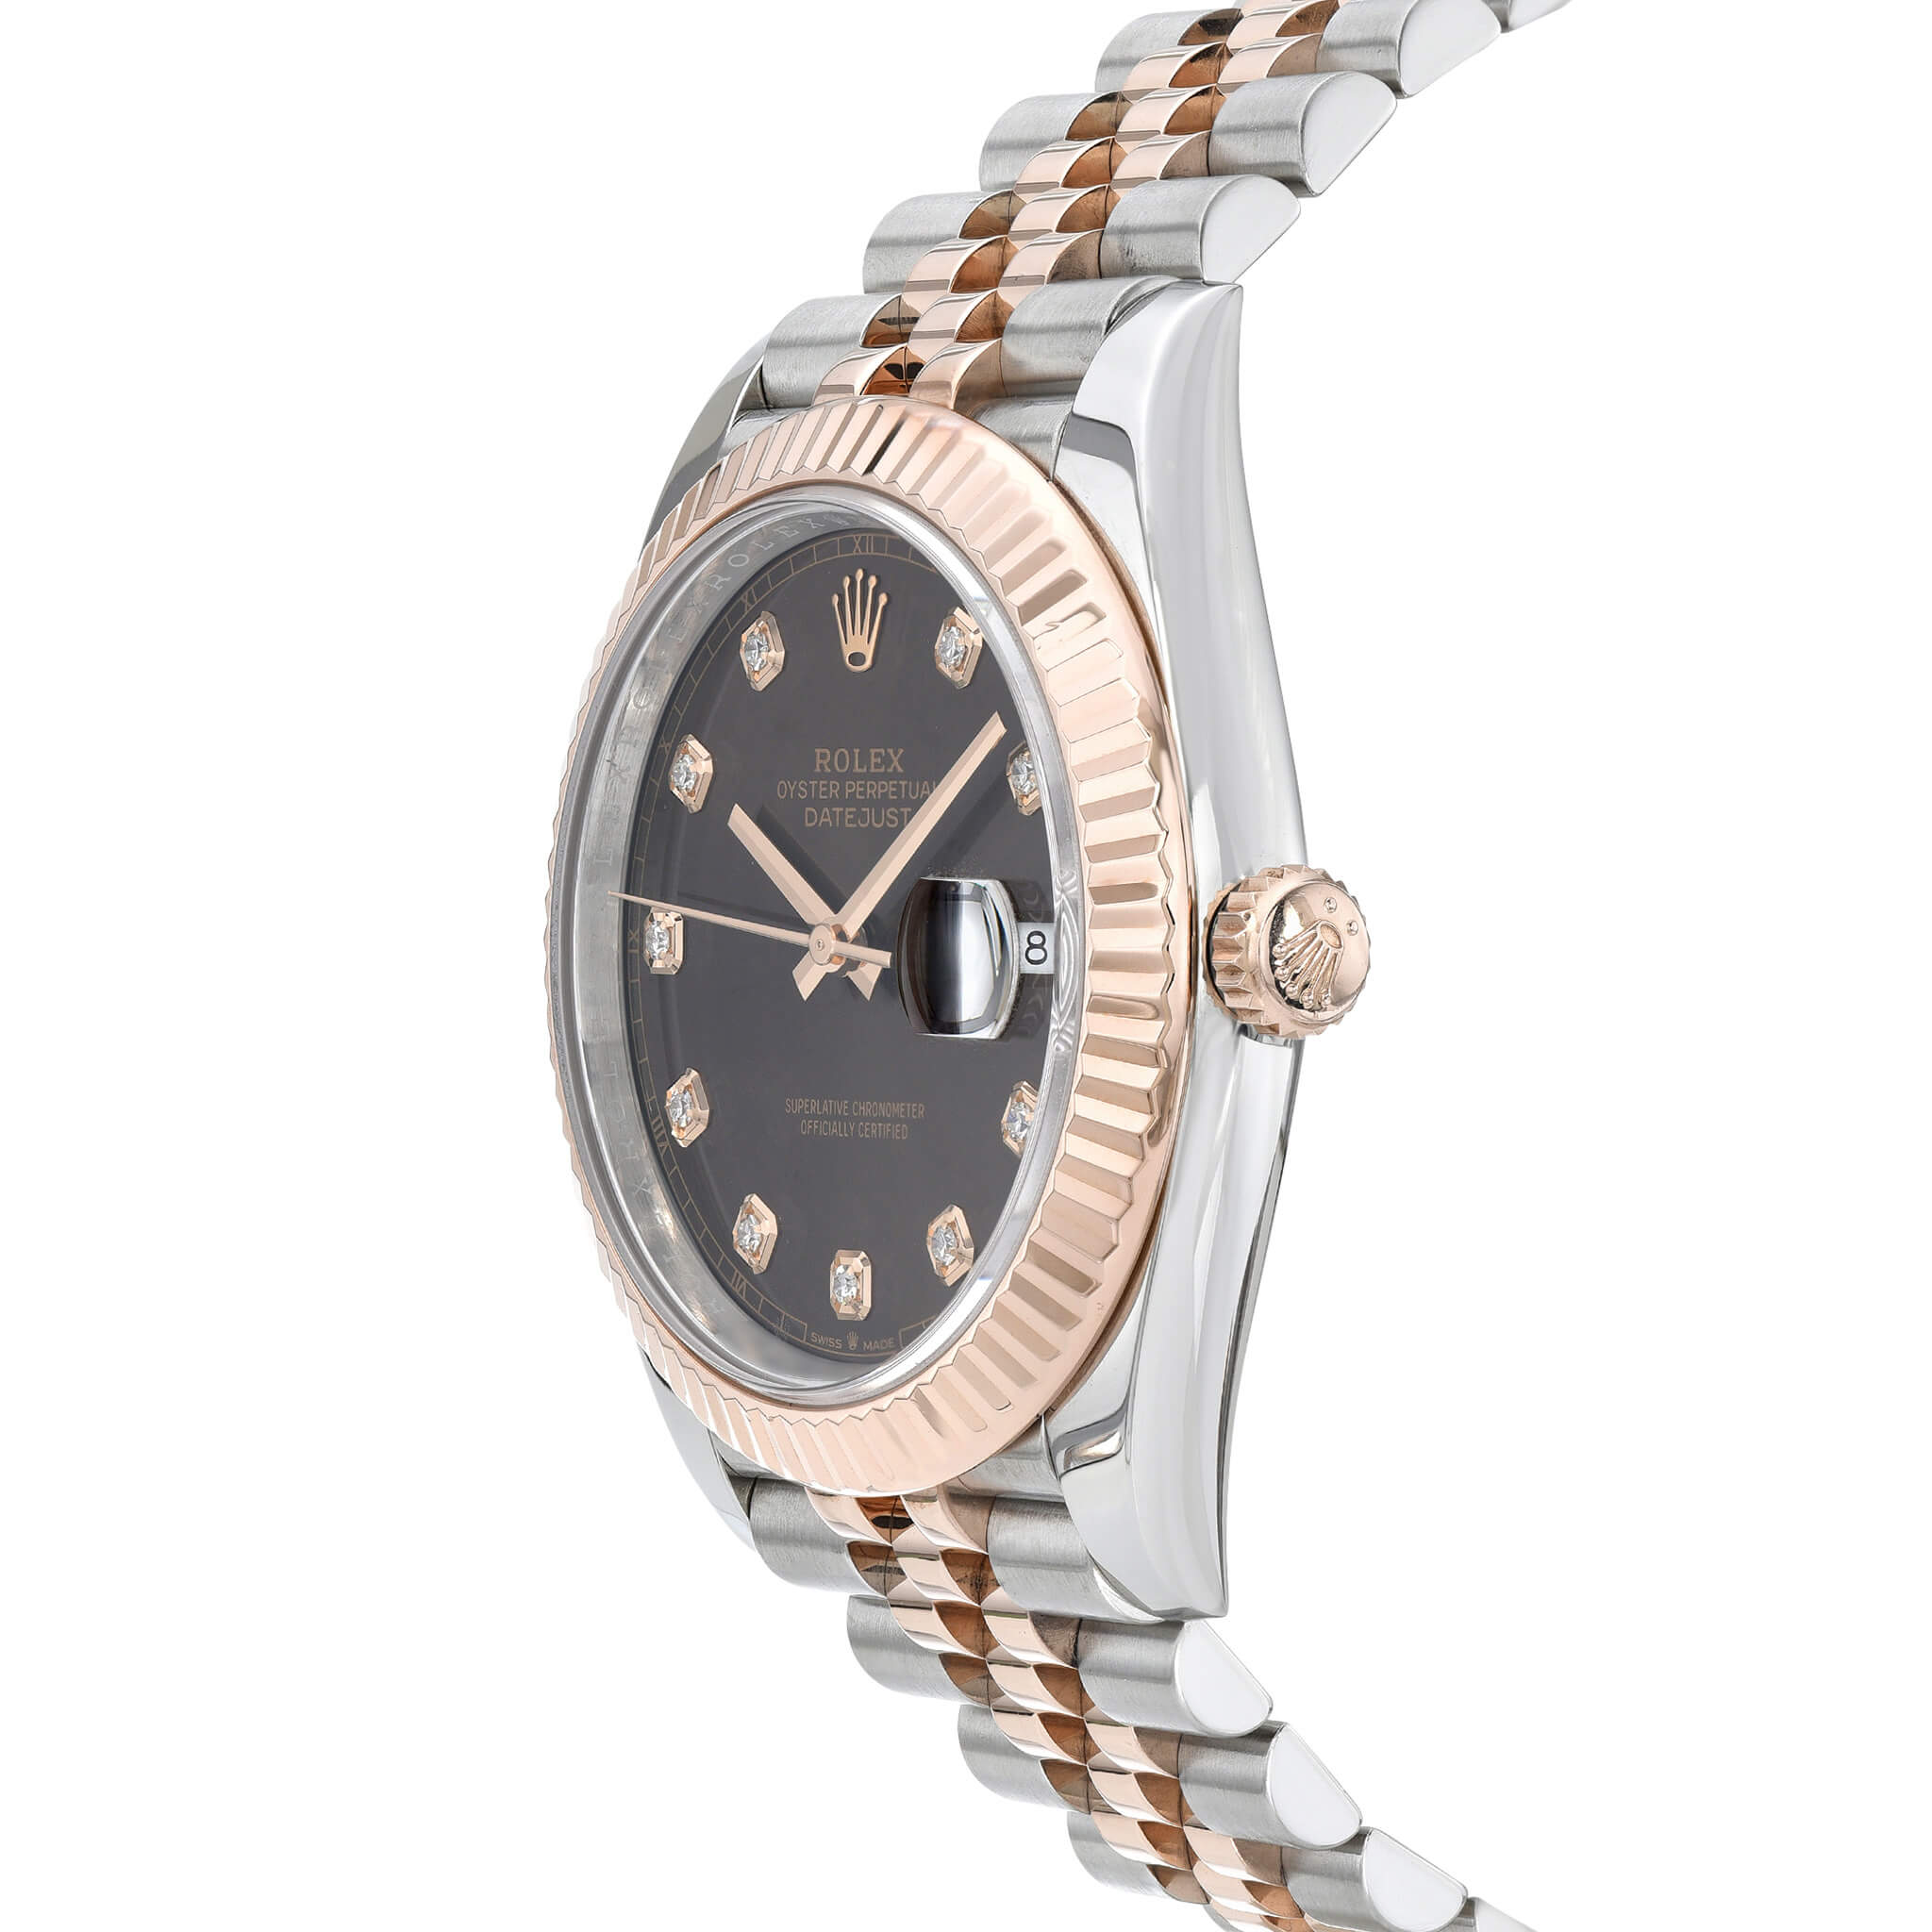 Rolex Datejust 16013 Right Side